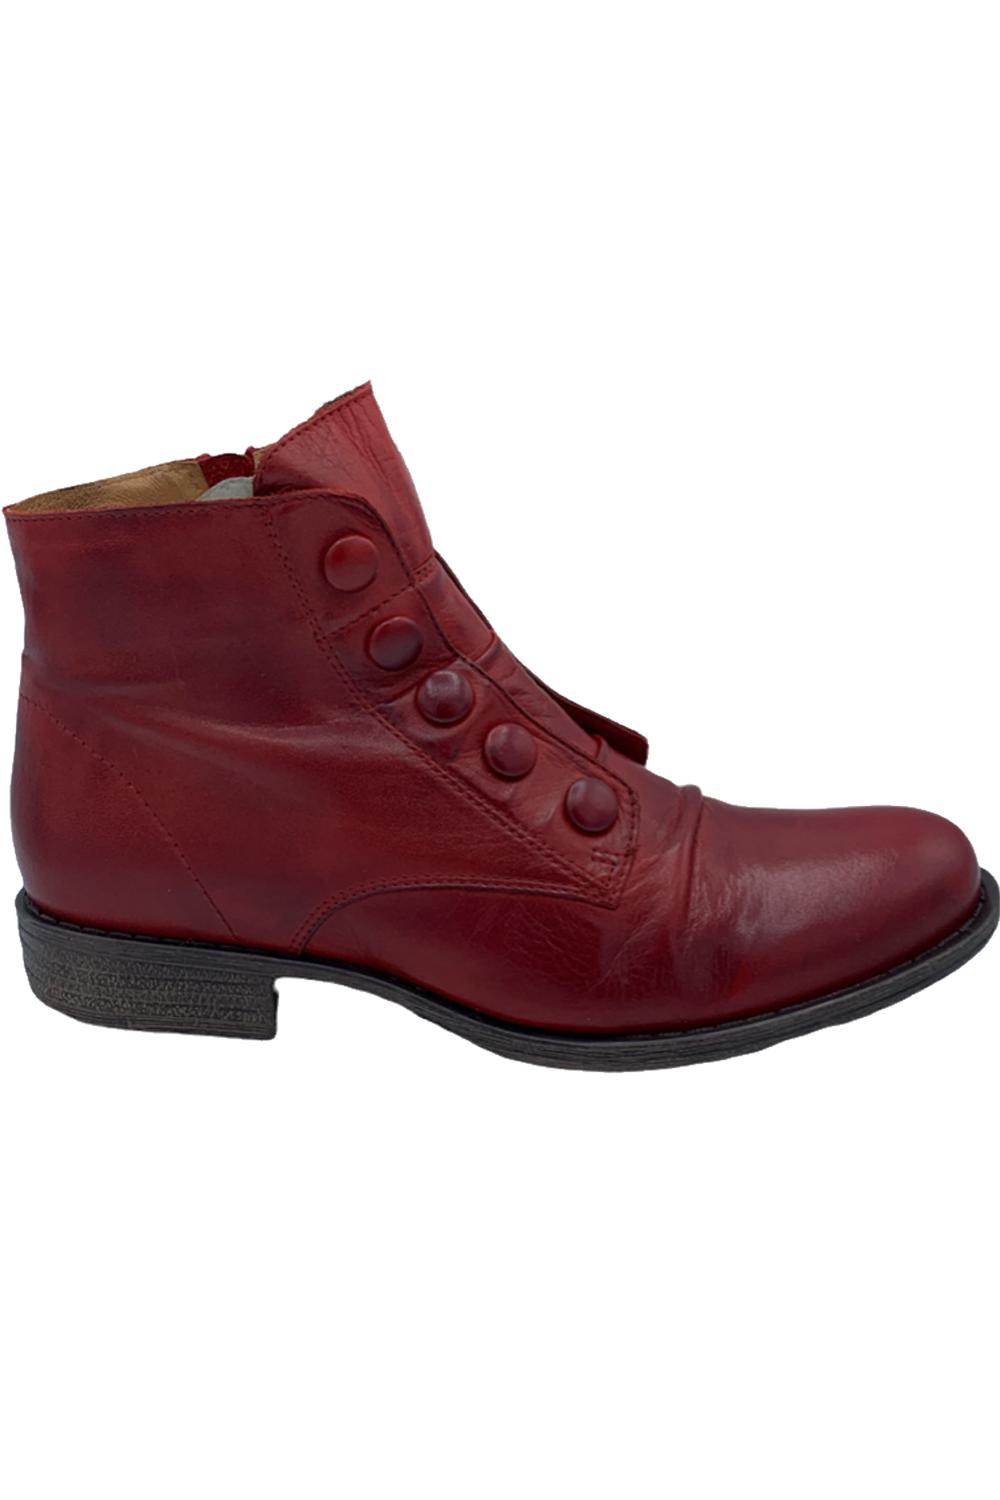 Miz Mooz Leather Button Ankle Boots Louise Red